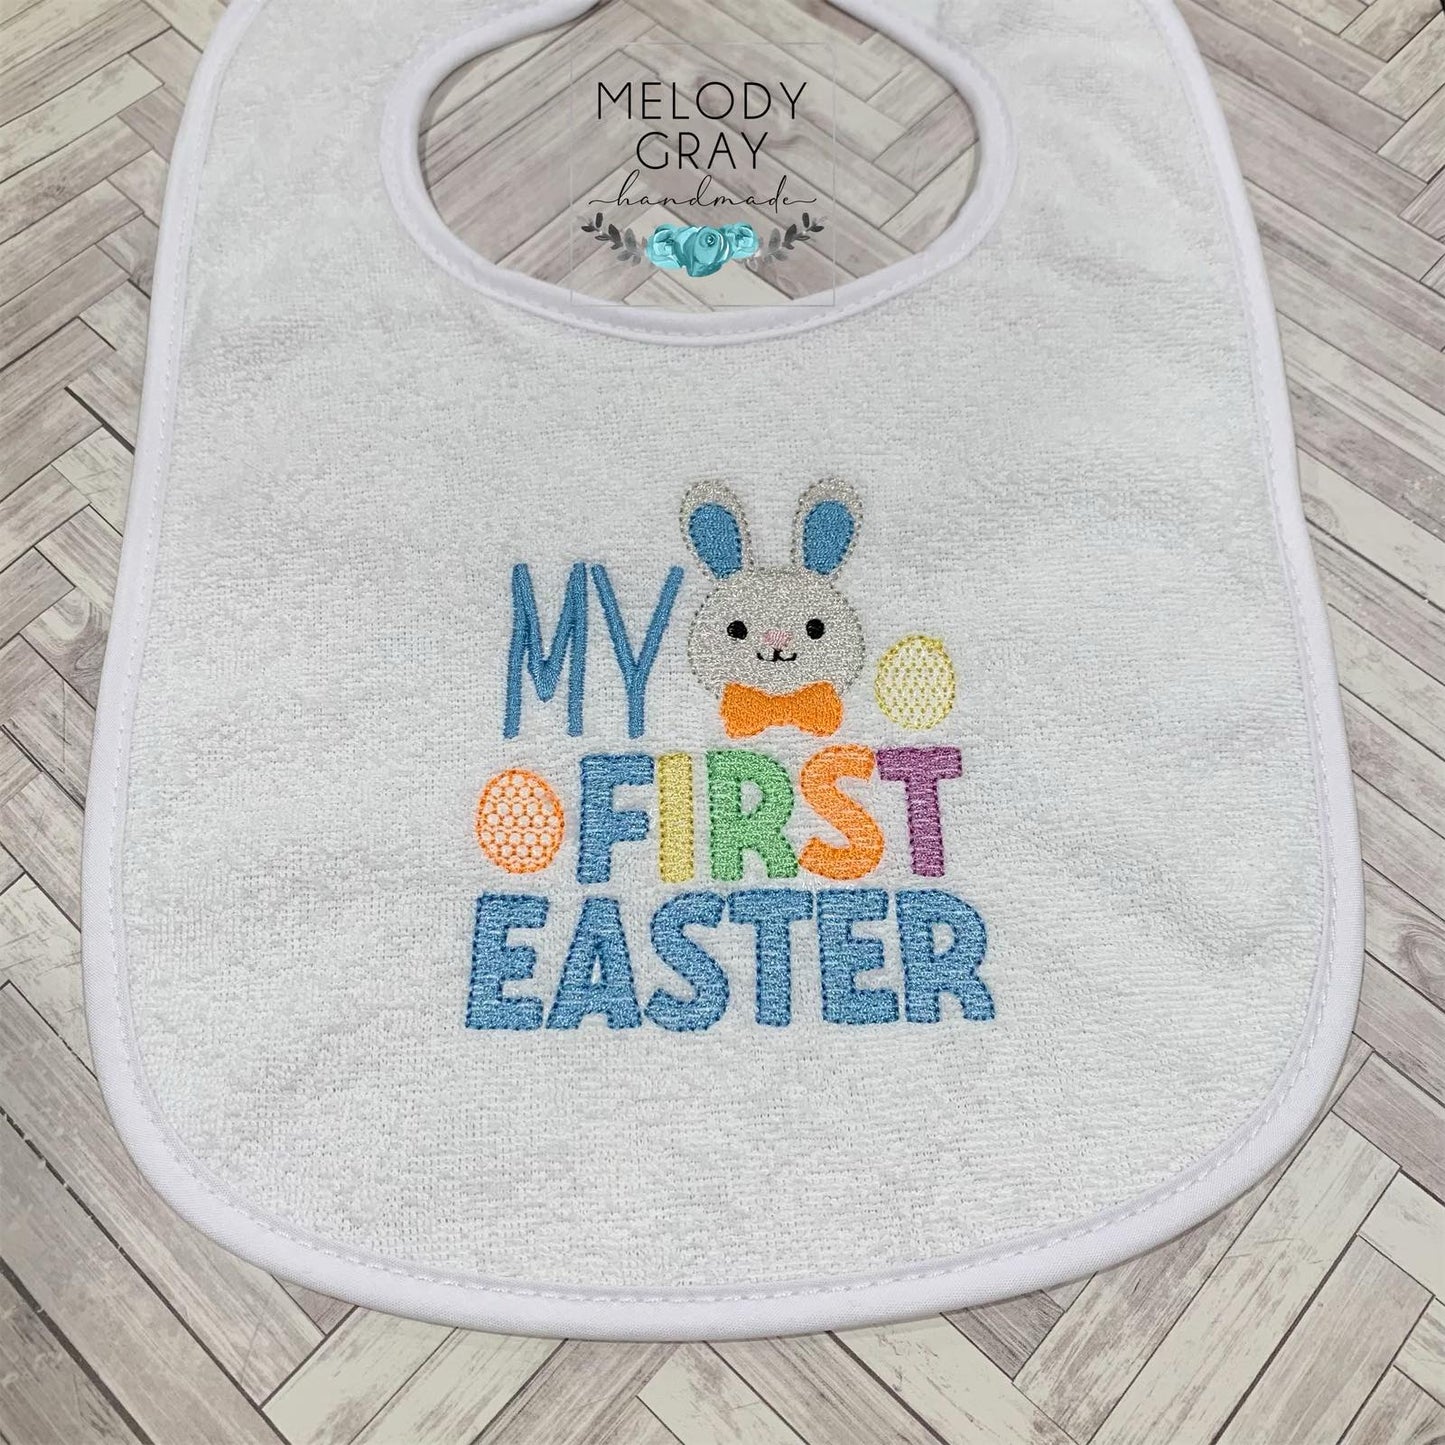 My First Easter Boy - 2 sizes- Digital Embroidery Design